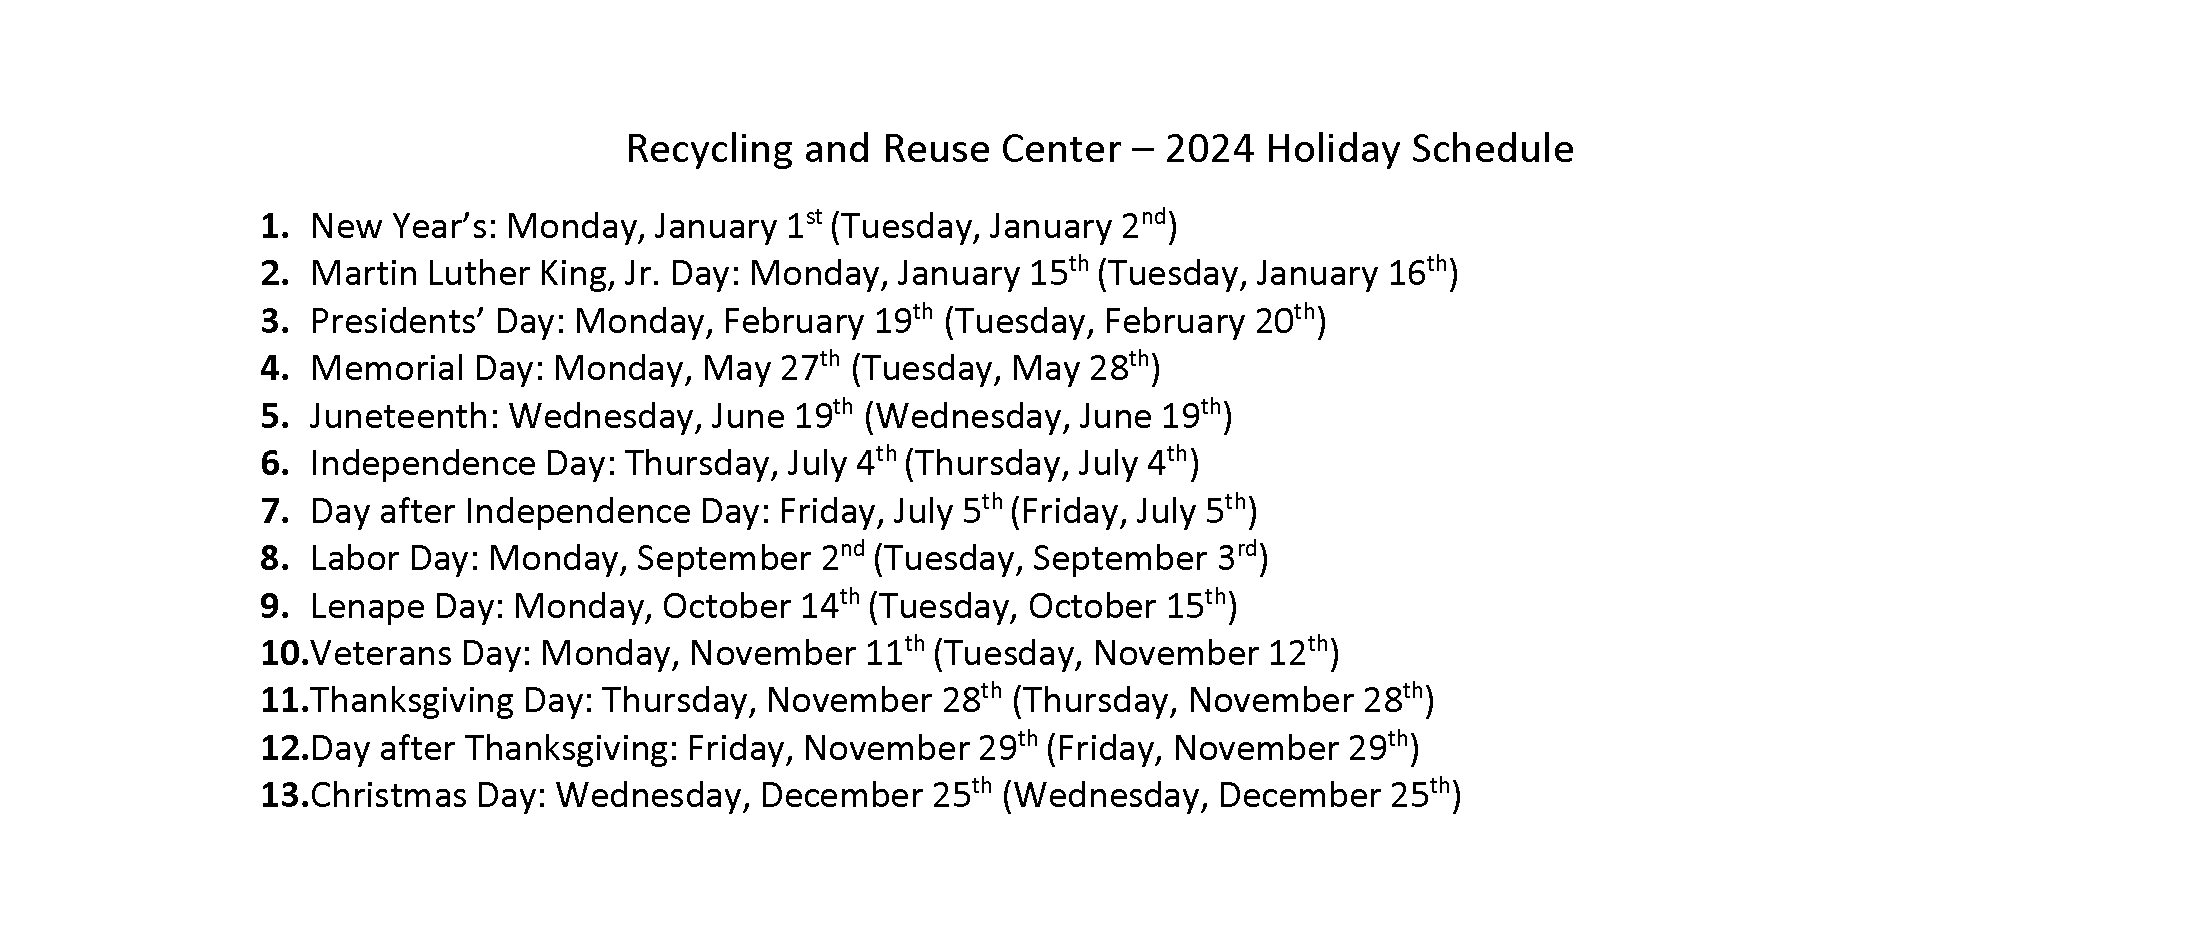 Recycling and Reuse Holidays 2024